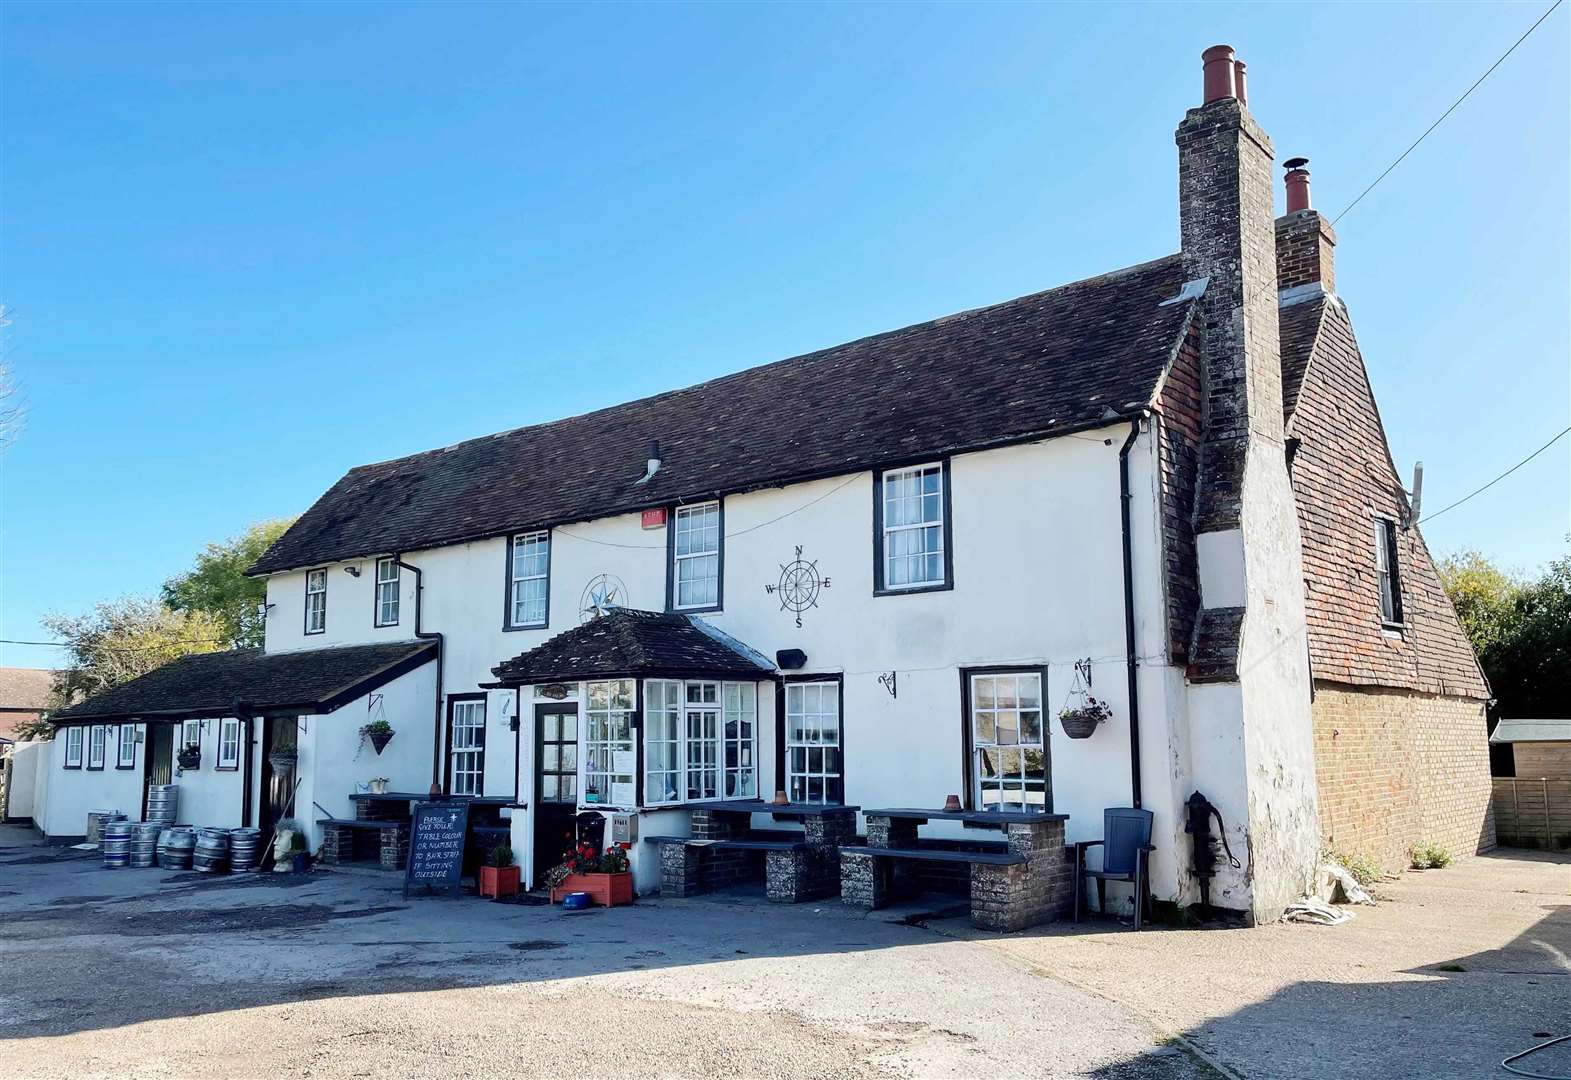 Romney Marsh pub The Star Inn at St Mary in the Marsh for sale with Clive Emson